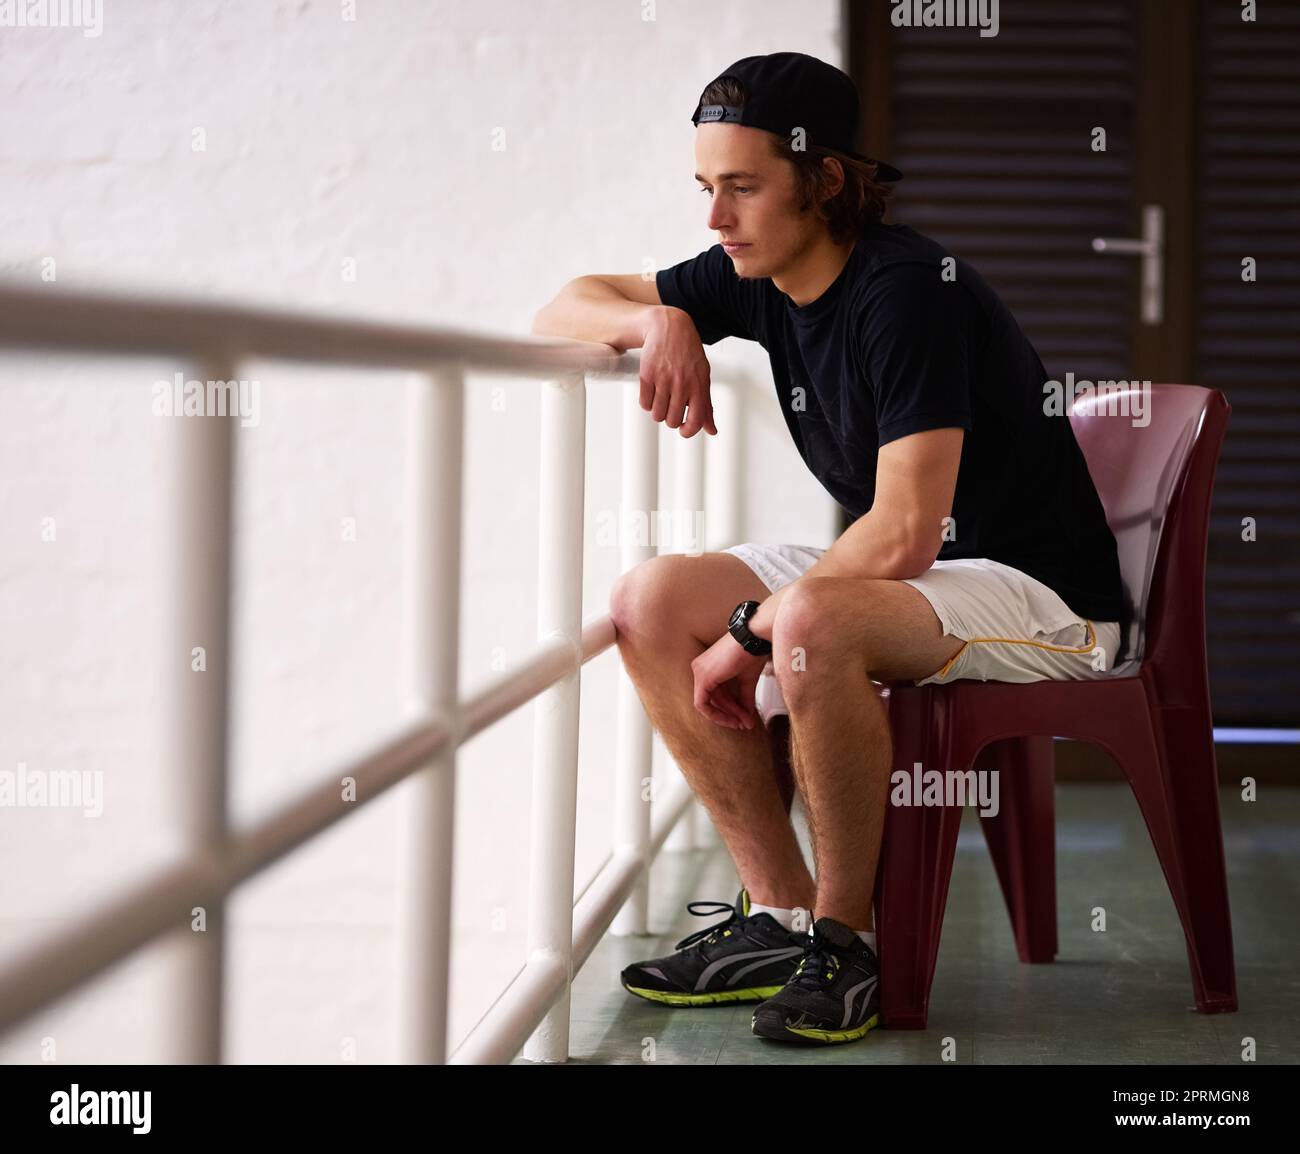 Just a spectator today. a handsome young man watching a game of squash. Stock Photo